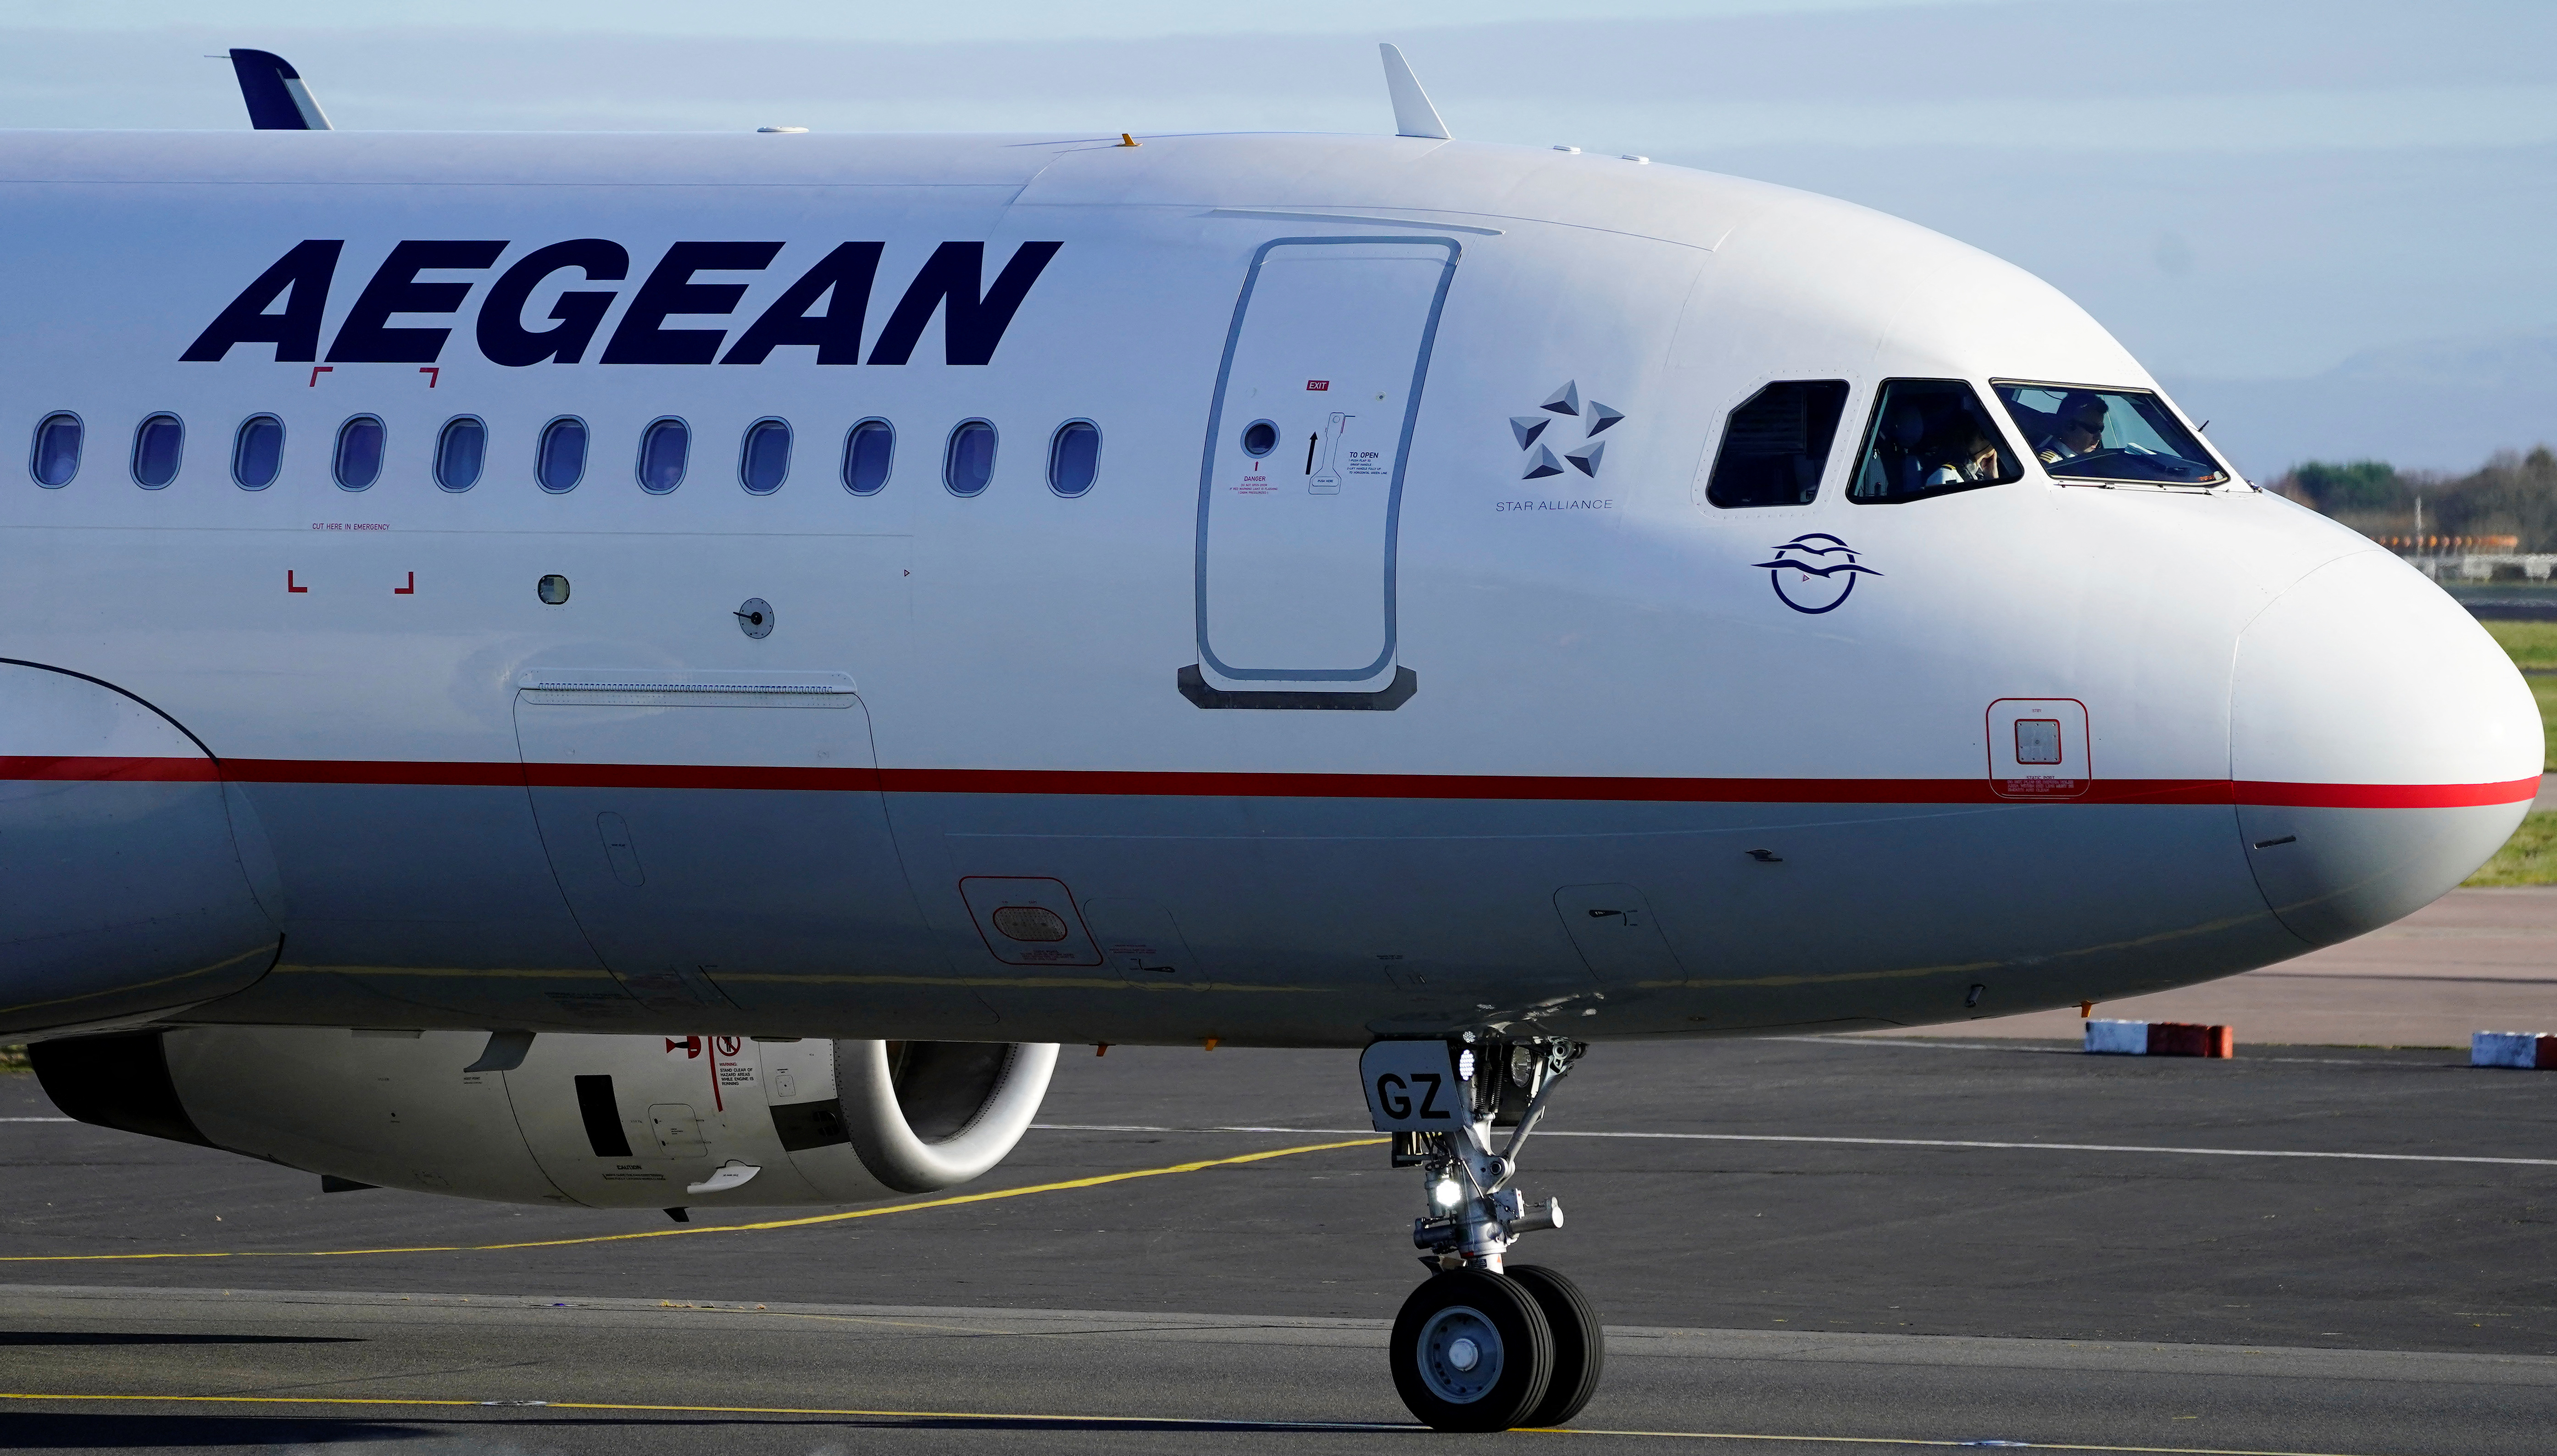 An Aegean Airlines Airbus A320 taxis as it prepares to take off from Manchester Airport, Britain.